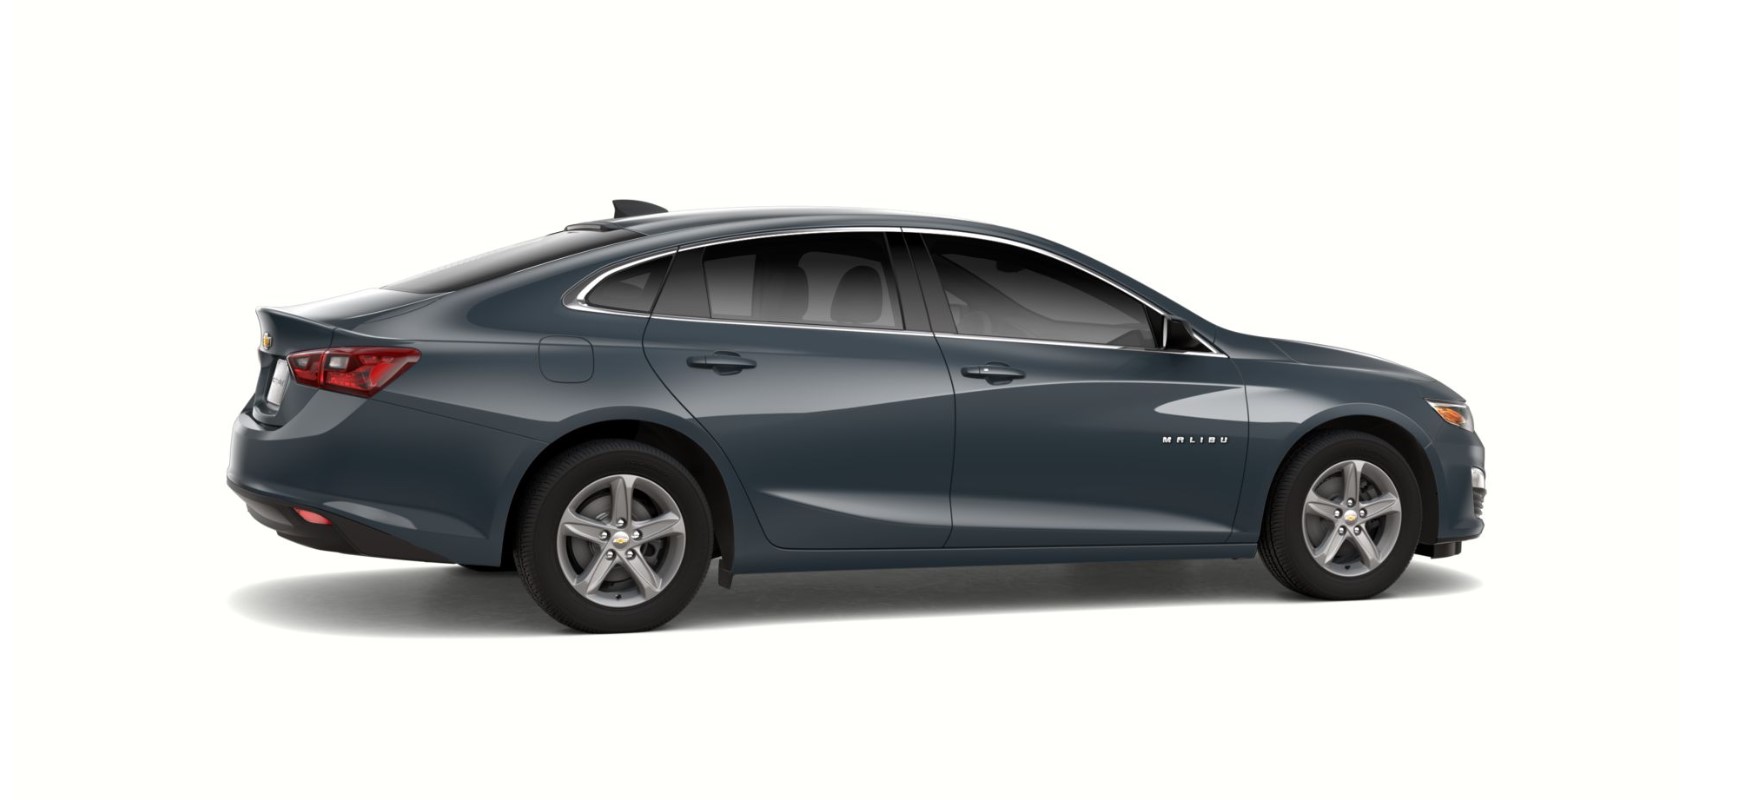 2019 Chevrolet Malibu LS Shadow Gray Exterior Side Picture